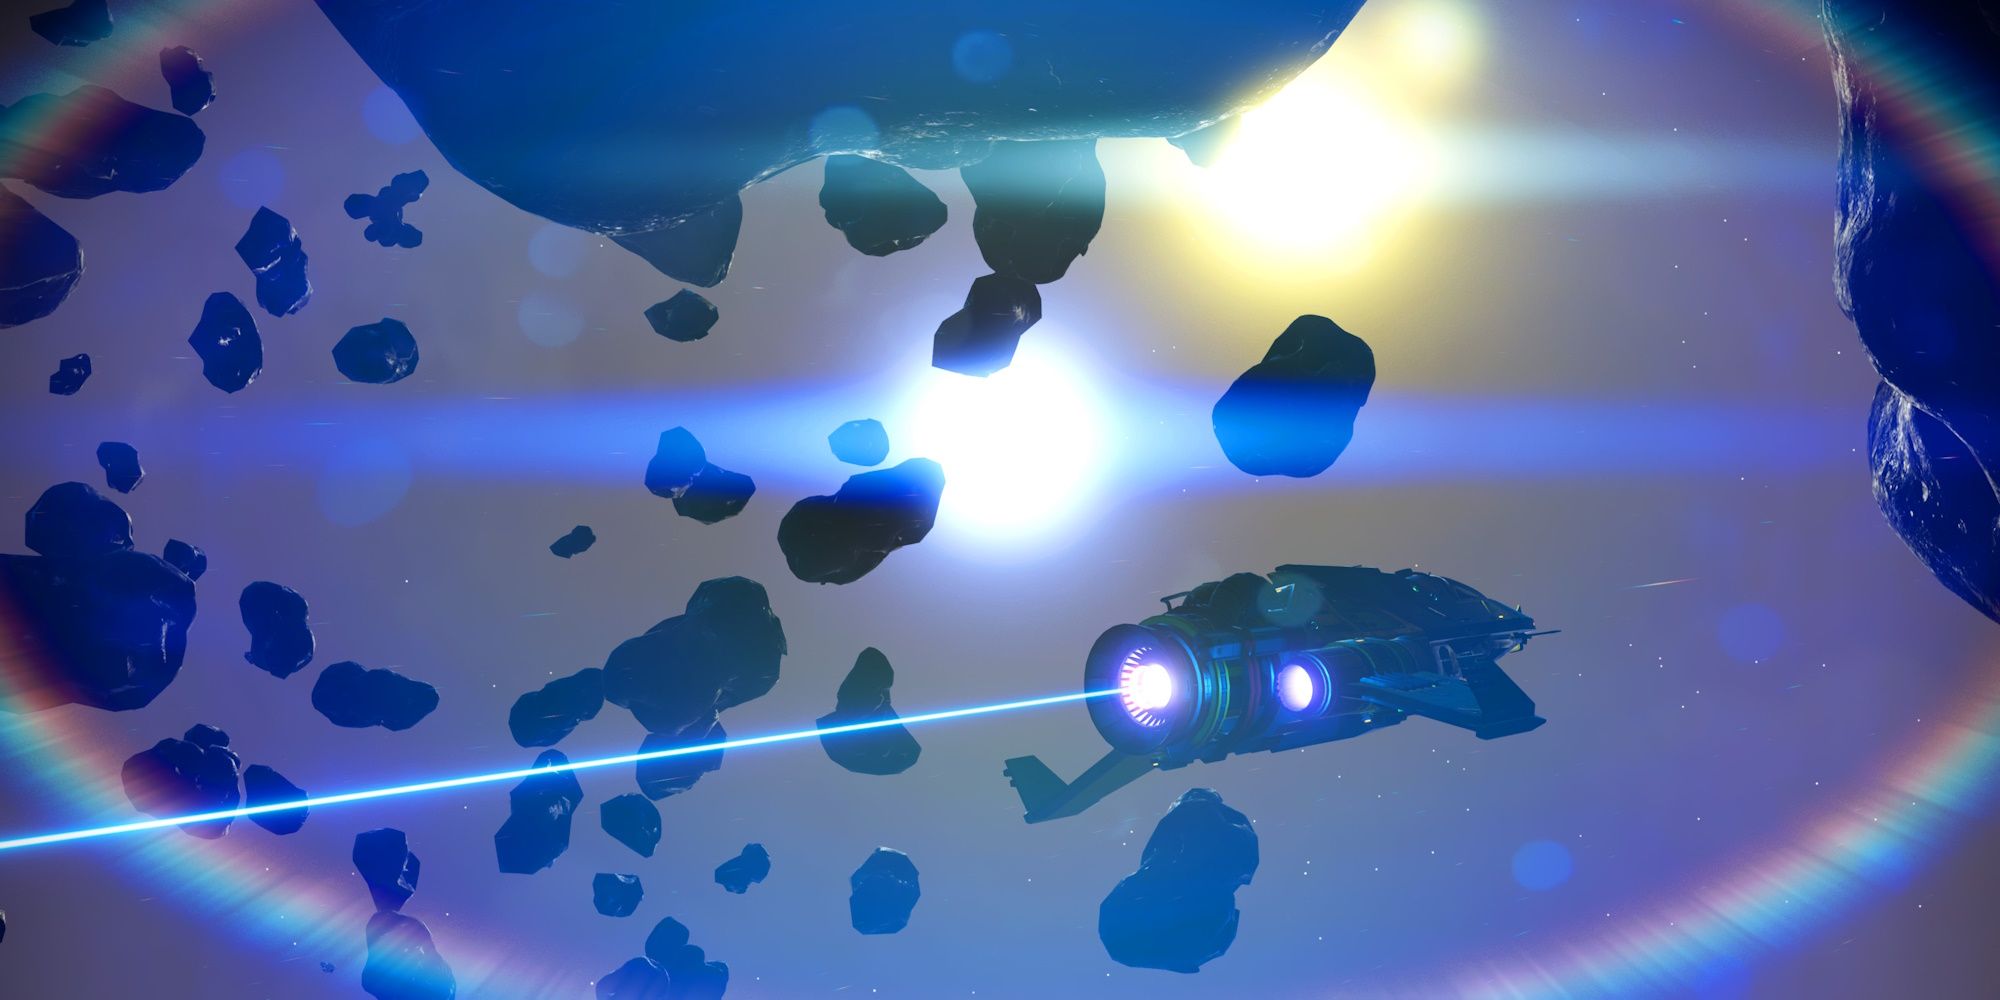 No Man's Sky Ship In Space Lens Flare